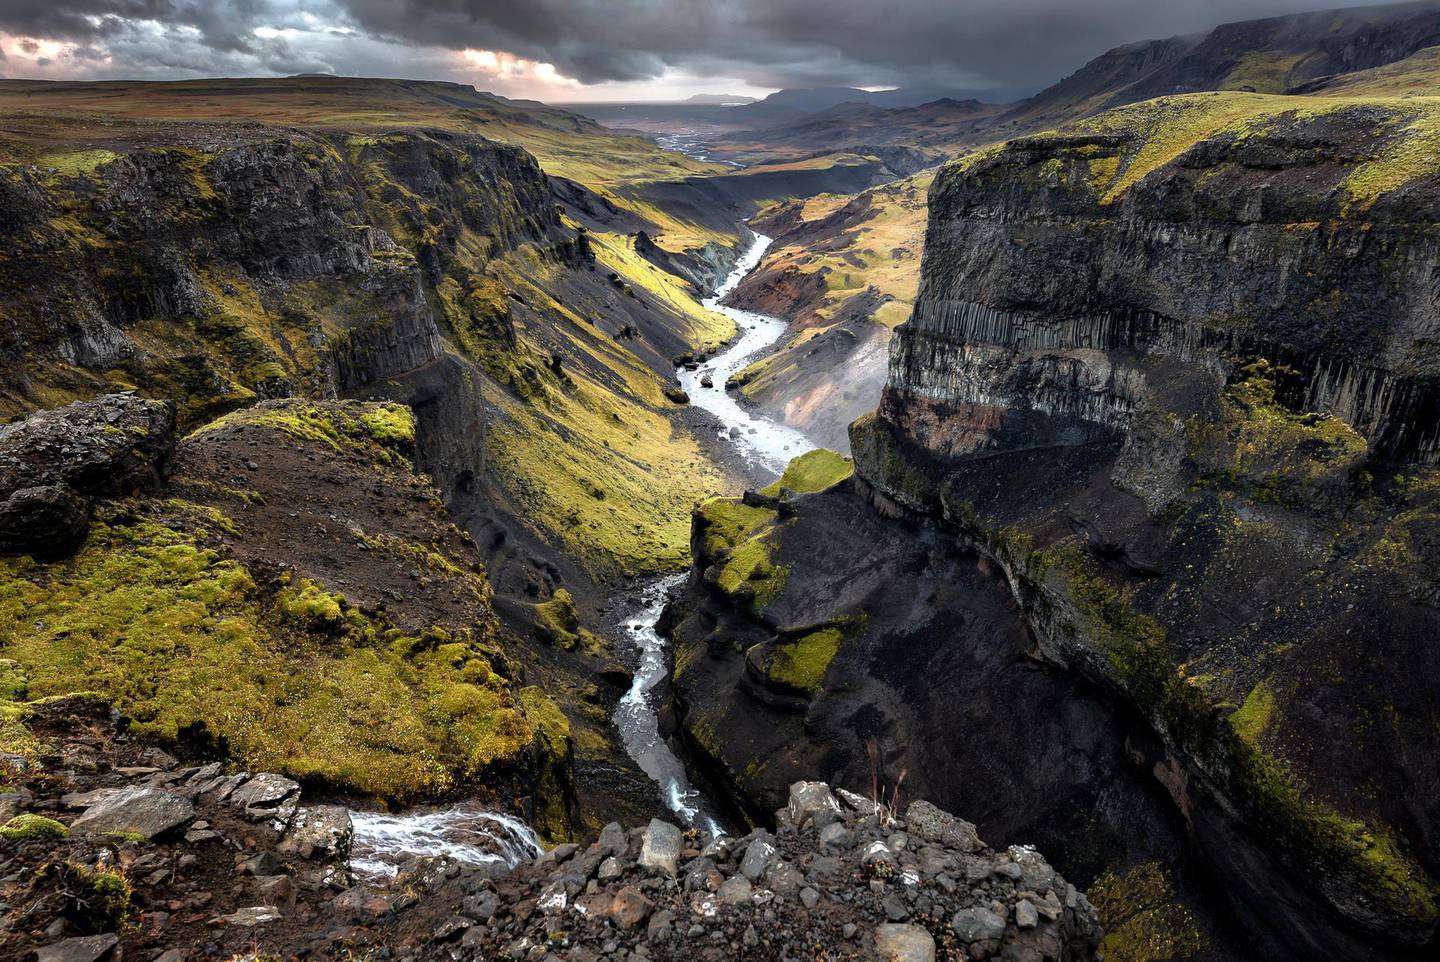 The Haifoss valley at sunset - Iceland. Getty Images